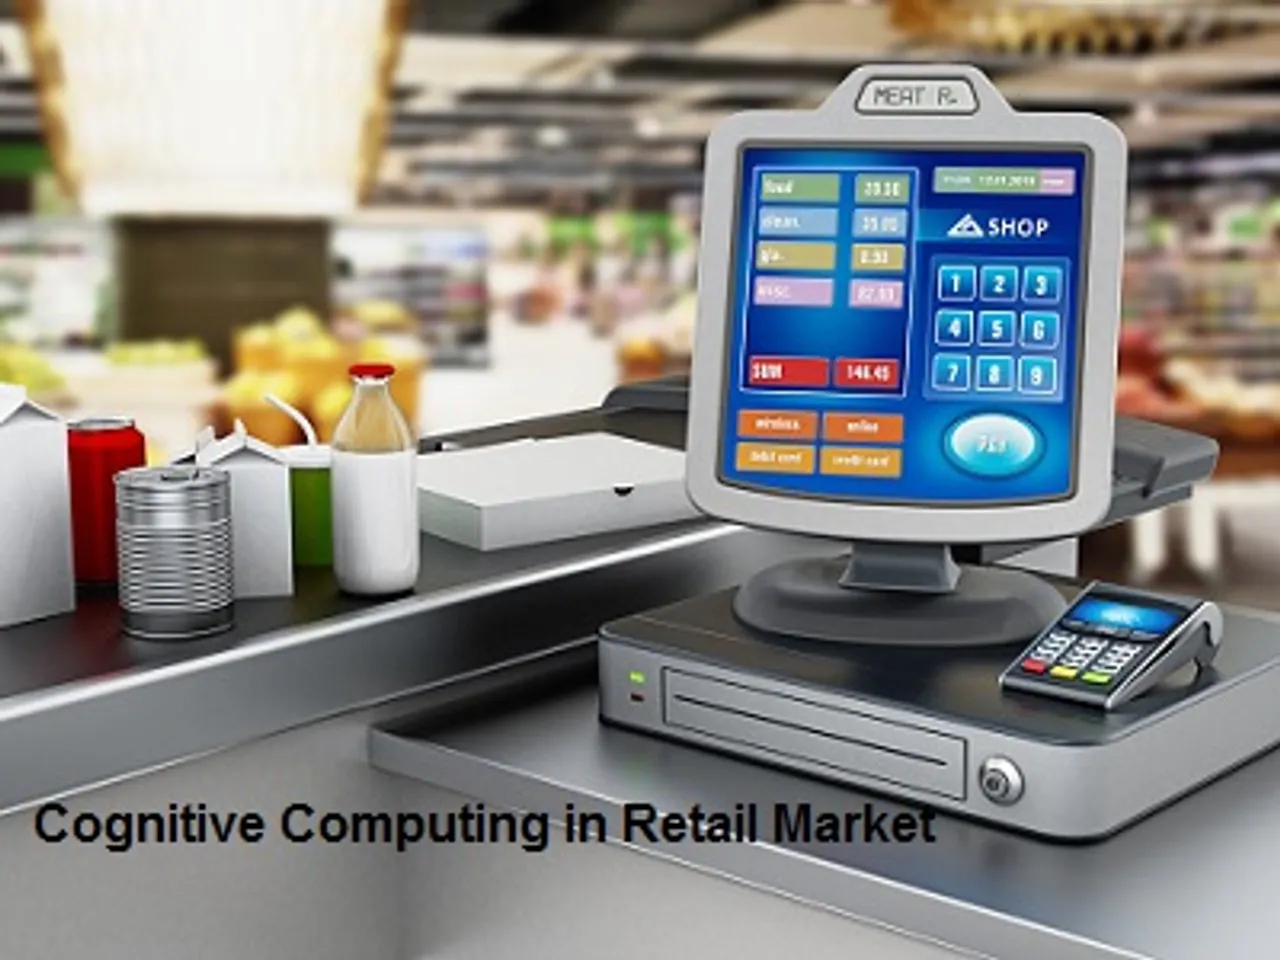 eRetail Cybertech Set to Redefine Omnichannel Retail with its Cloud Based POS Billing Software, ‘Prana POS’